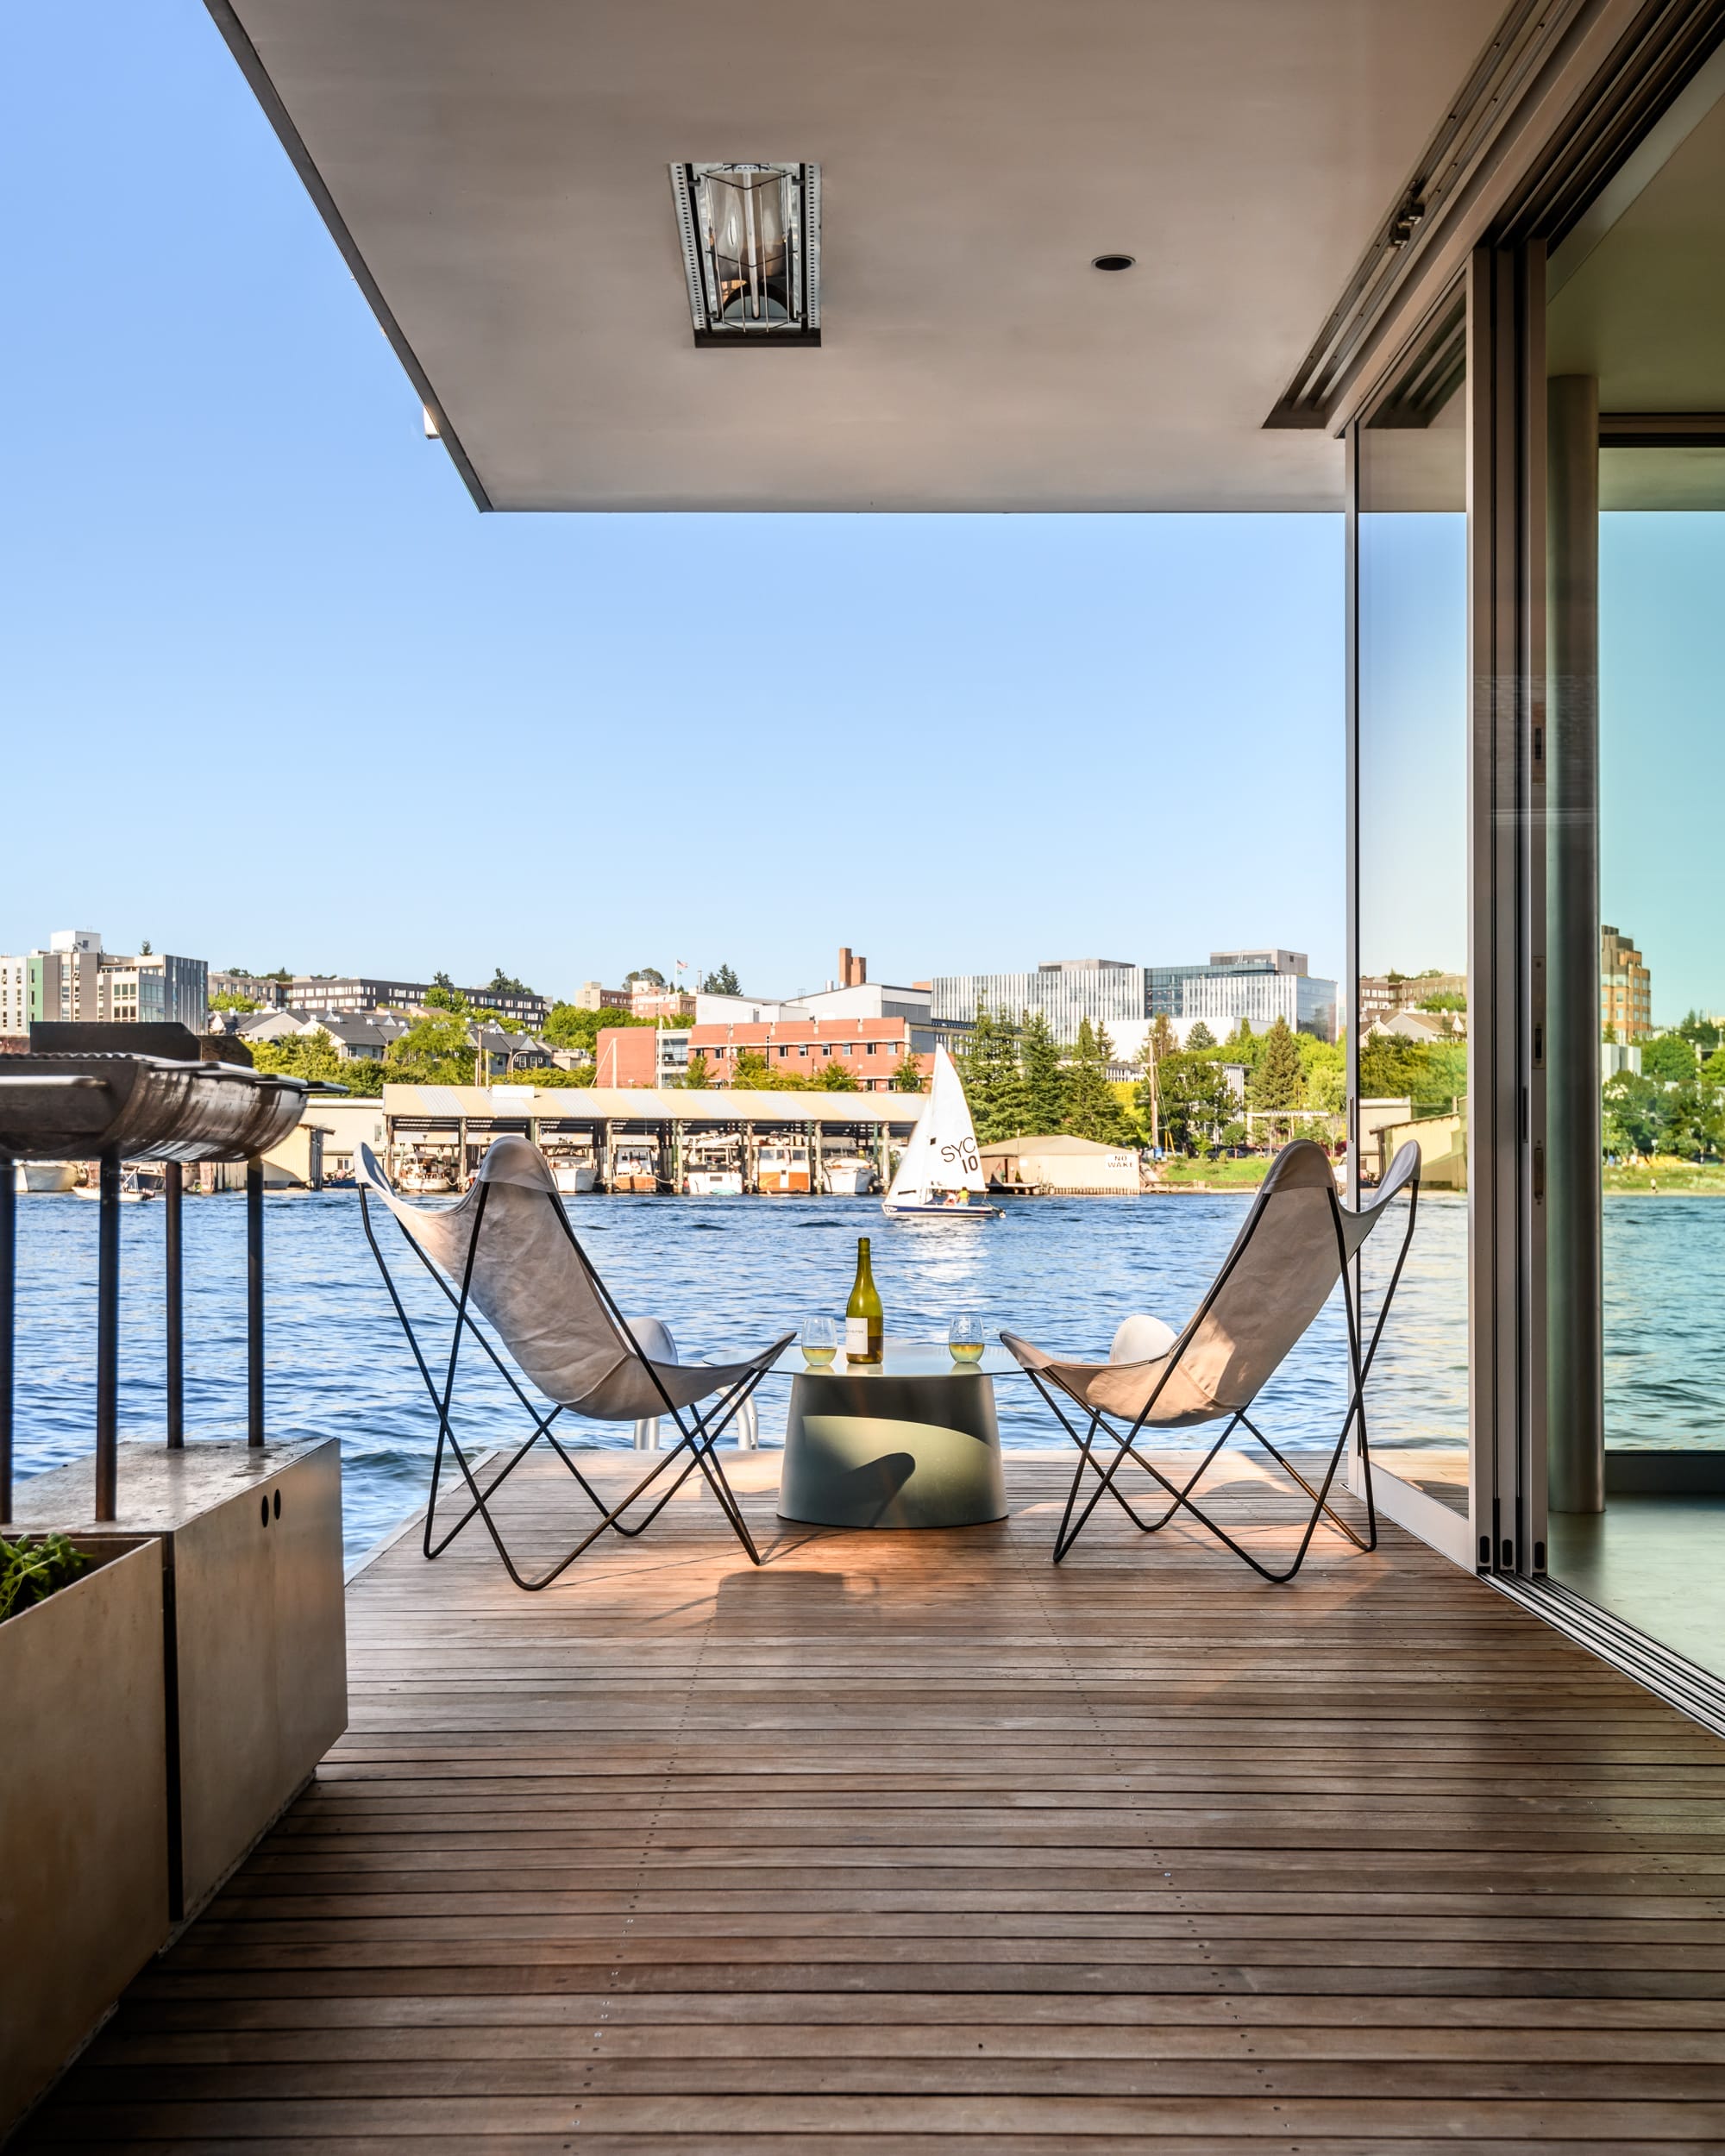 A wooden deck with chairs and a view of the water.